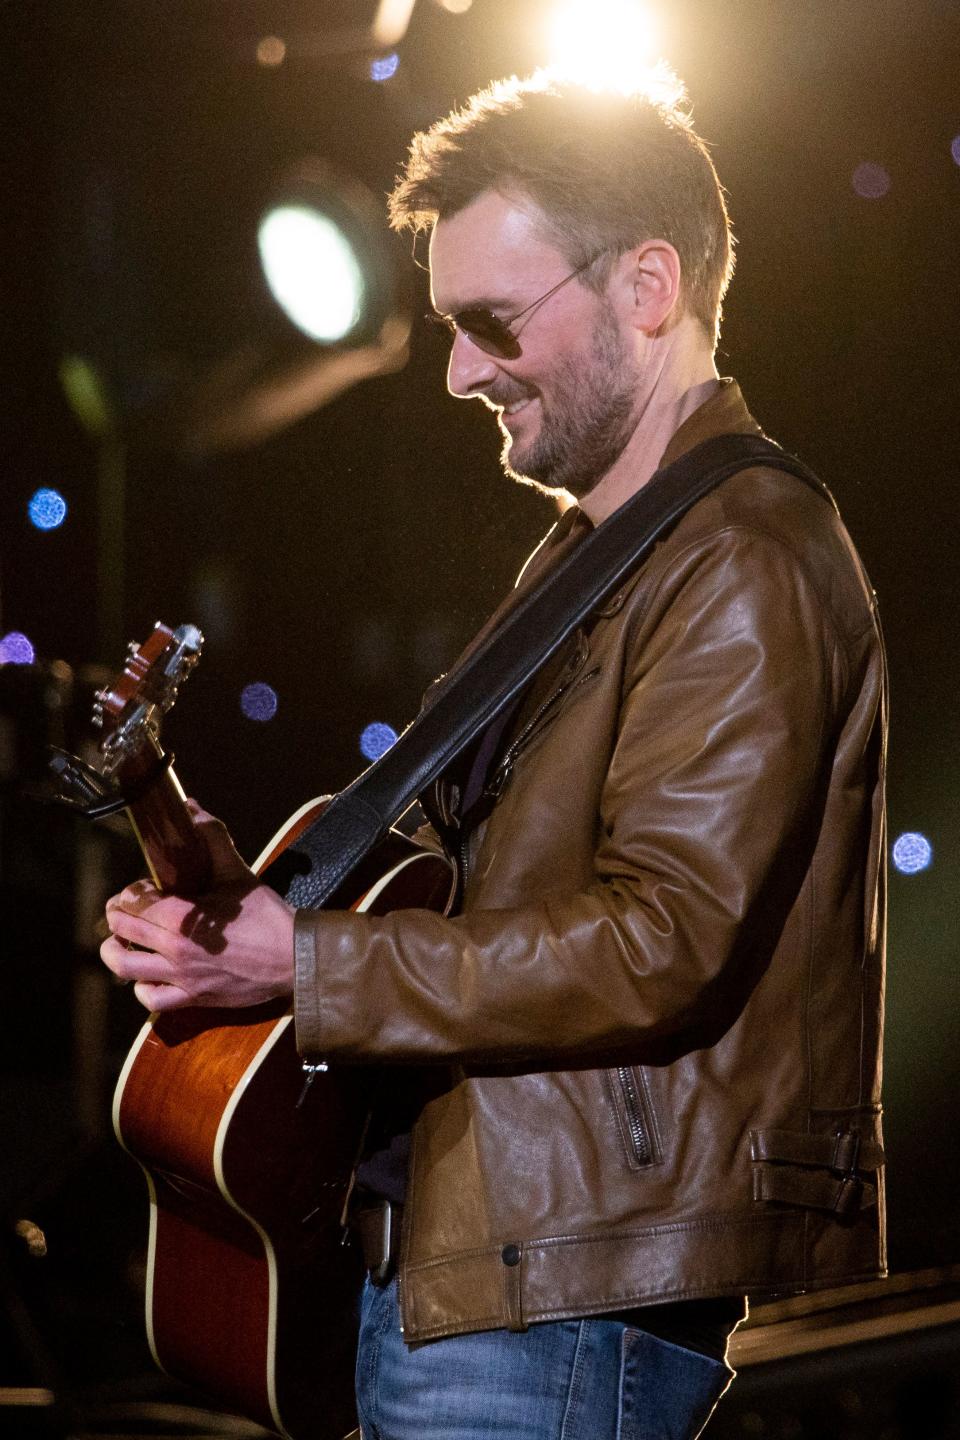 Eric Church performs during the Willie: Life & Songs of an American Outlaw concert at Bridgestone Arena in Nashville, Tenn., Saturday, Jan. 12, 2019.